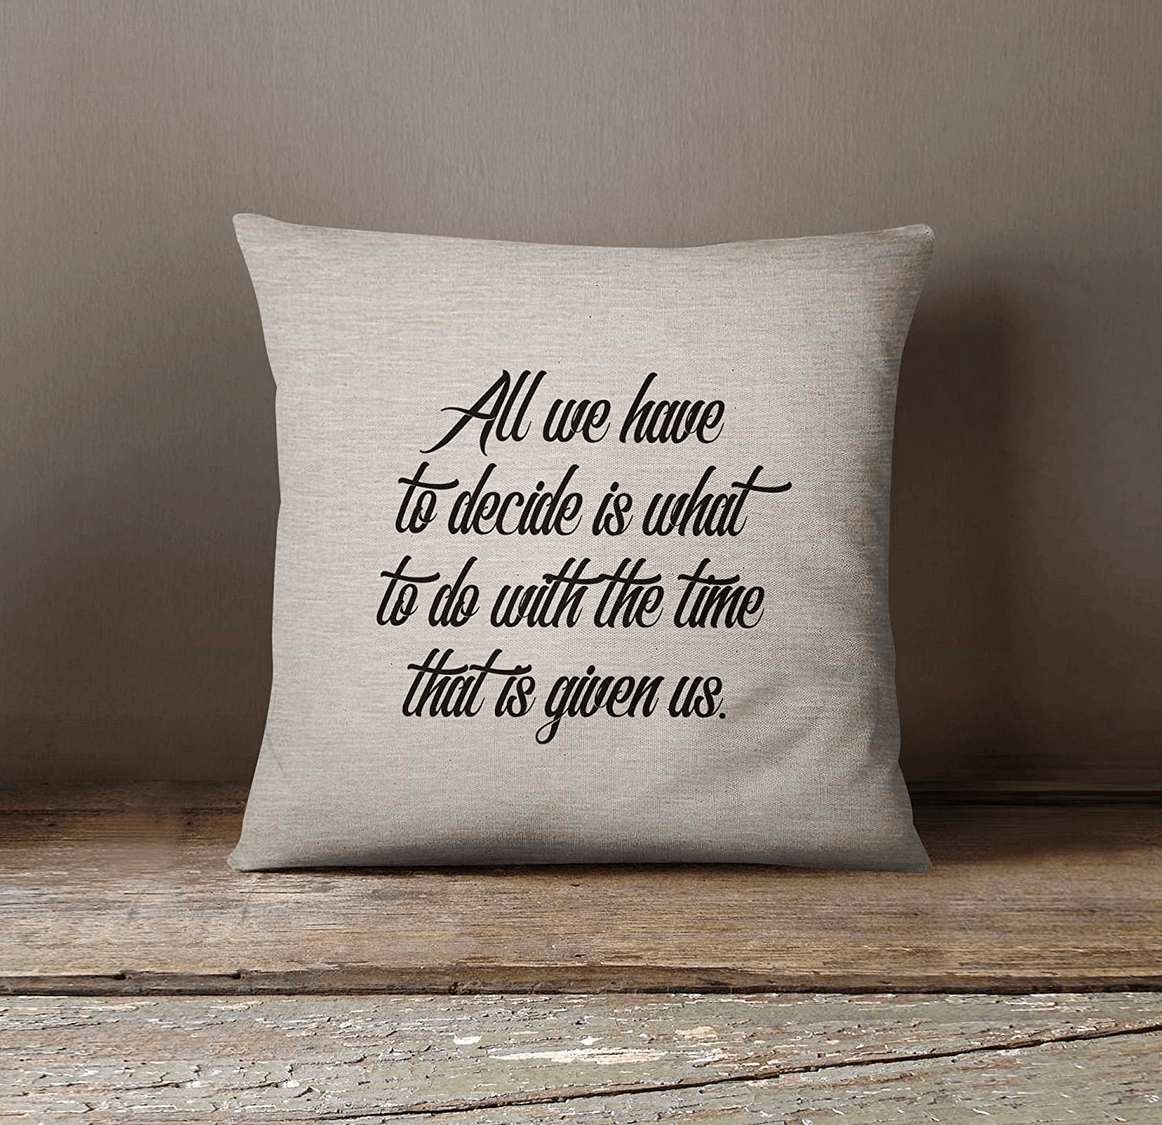 A  gray throw pillow with the phrase "All we have to decide is what to do with the time that is given us" in black letters.